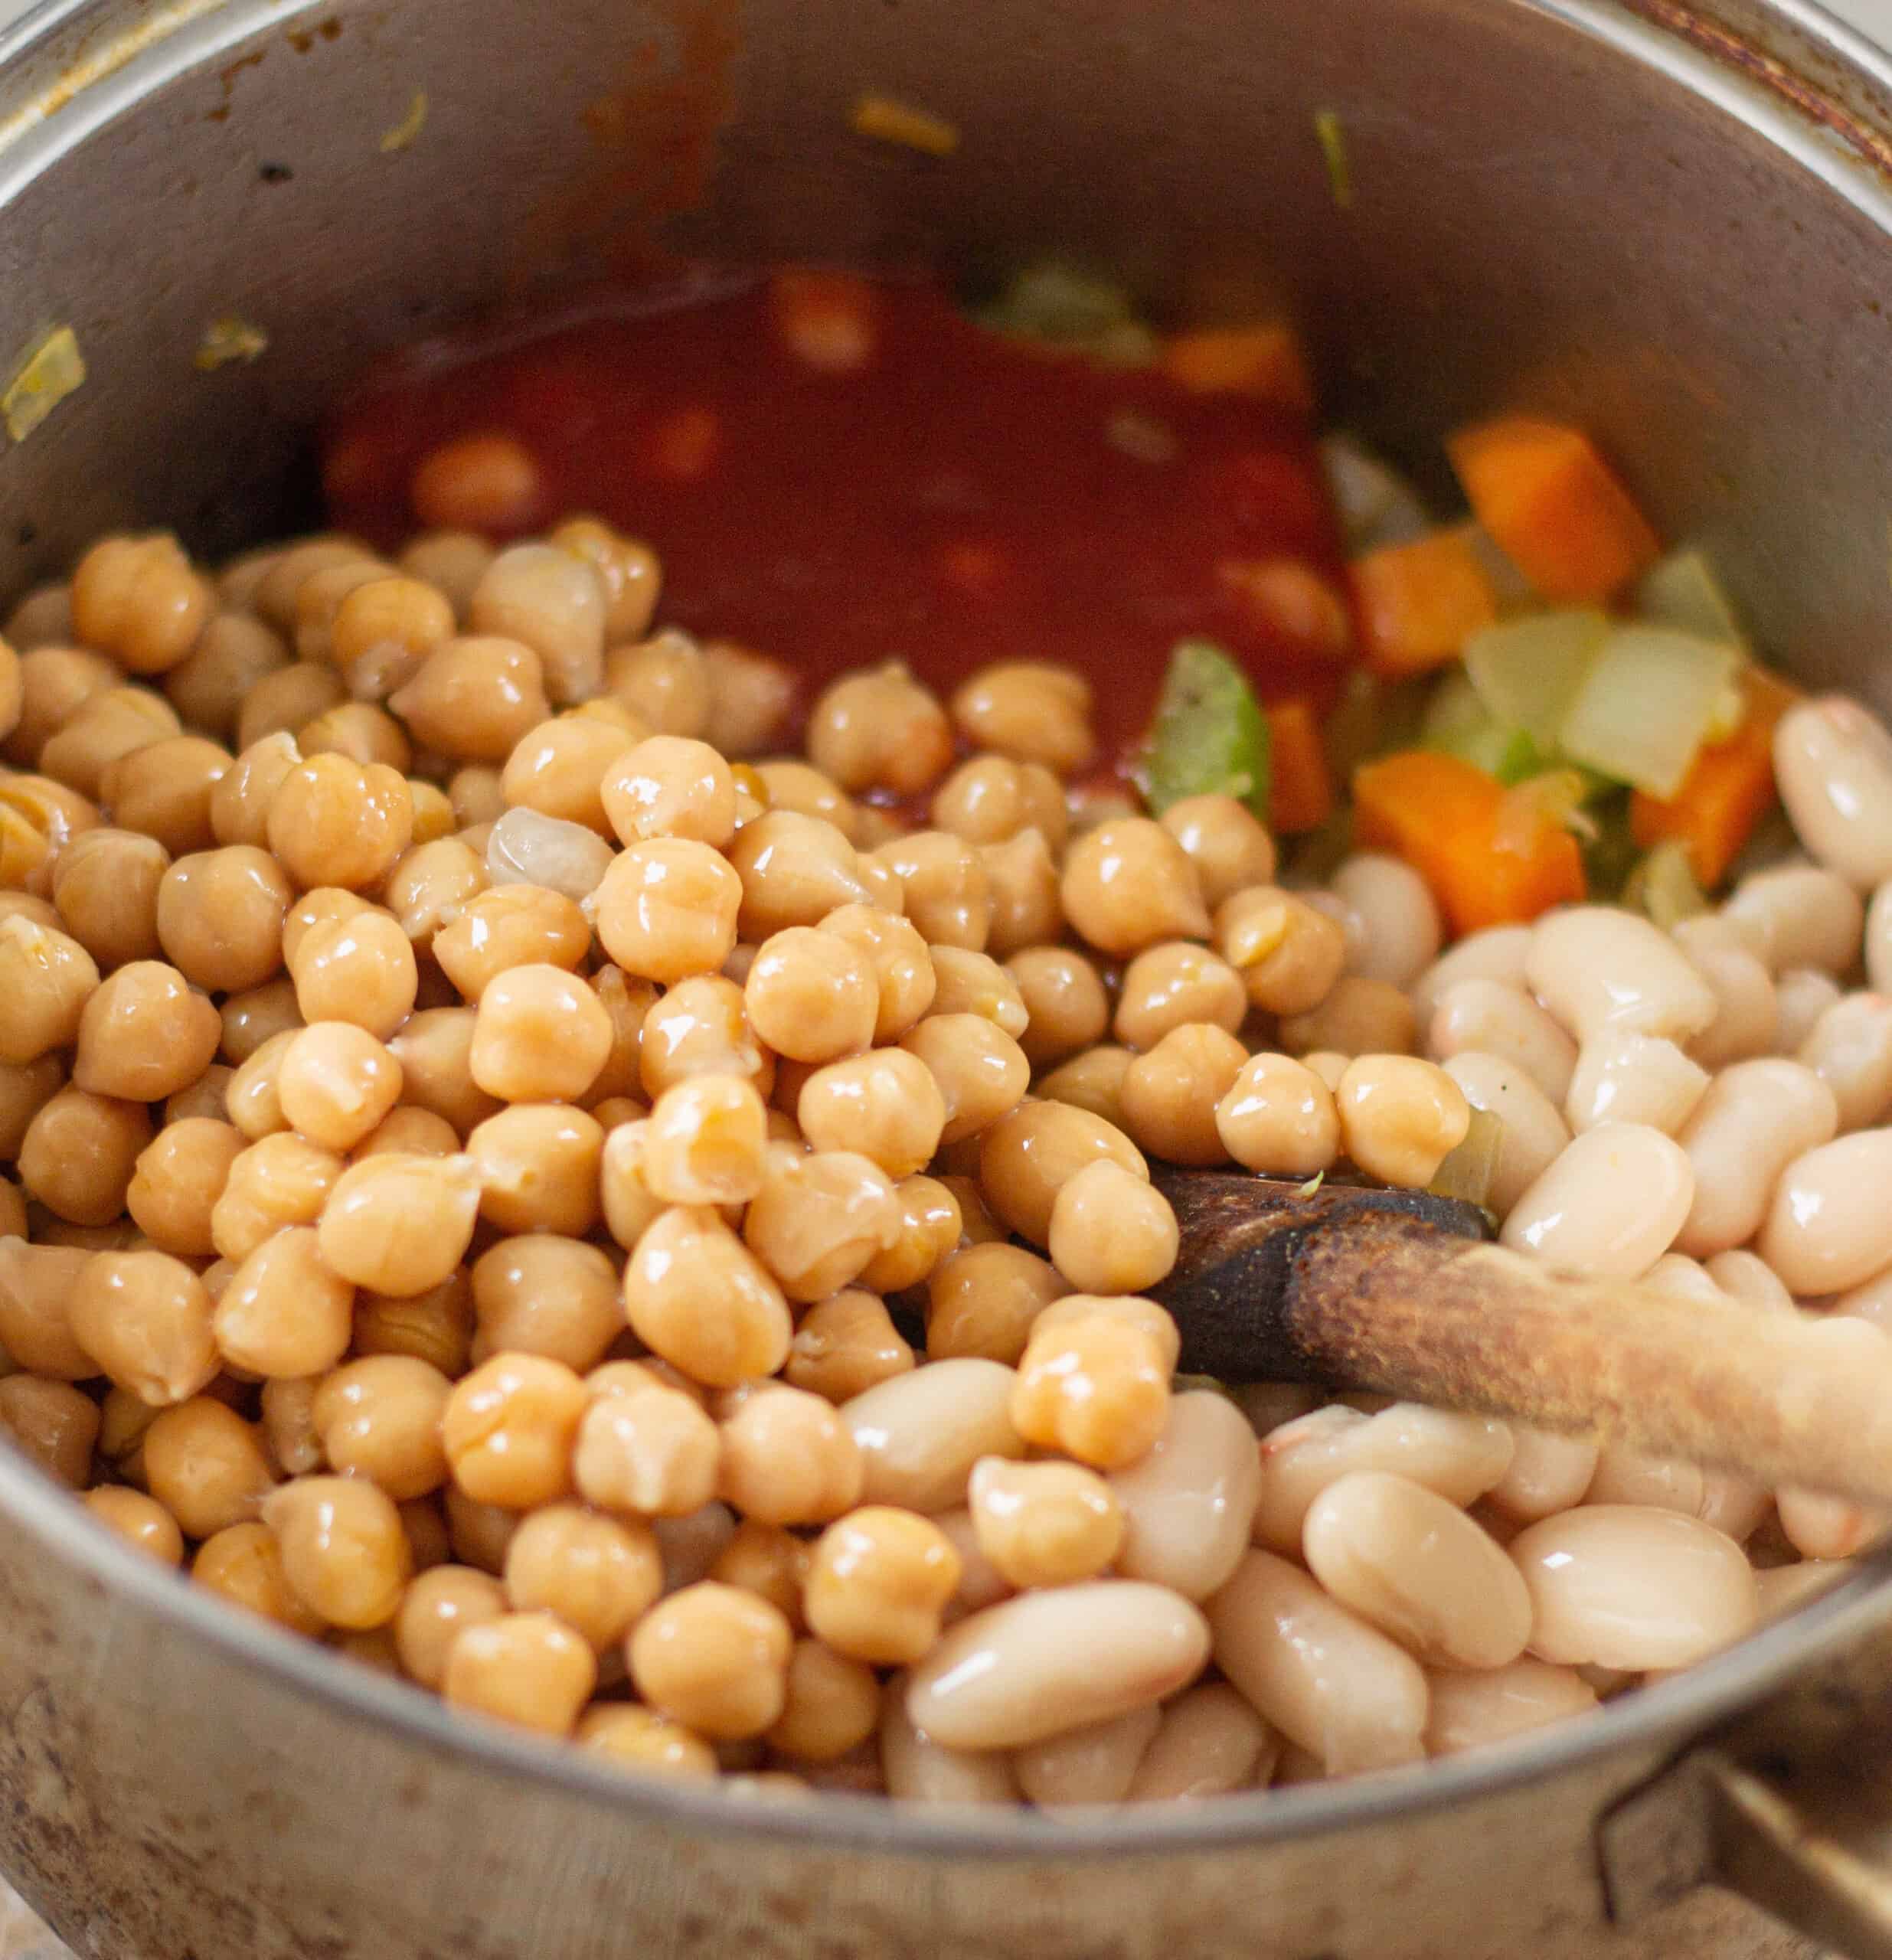 Adding chickpeas and cannellii beans to soup 